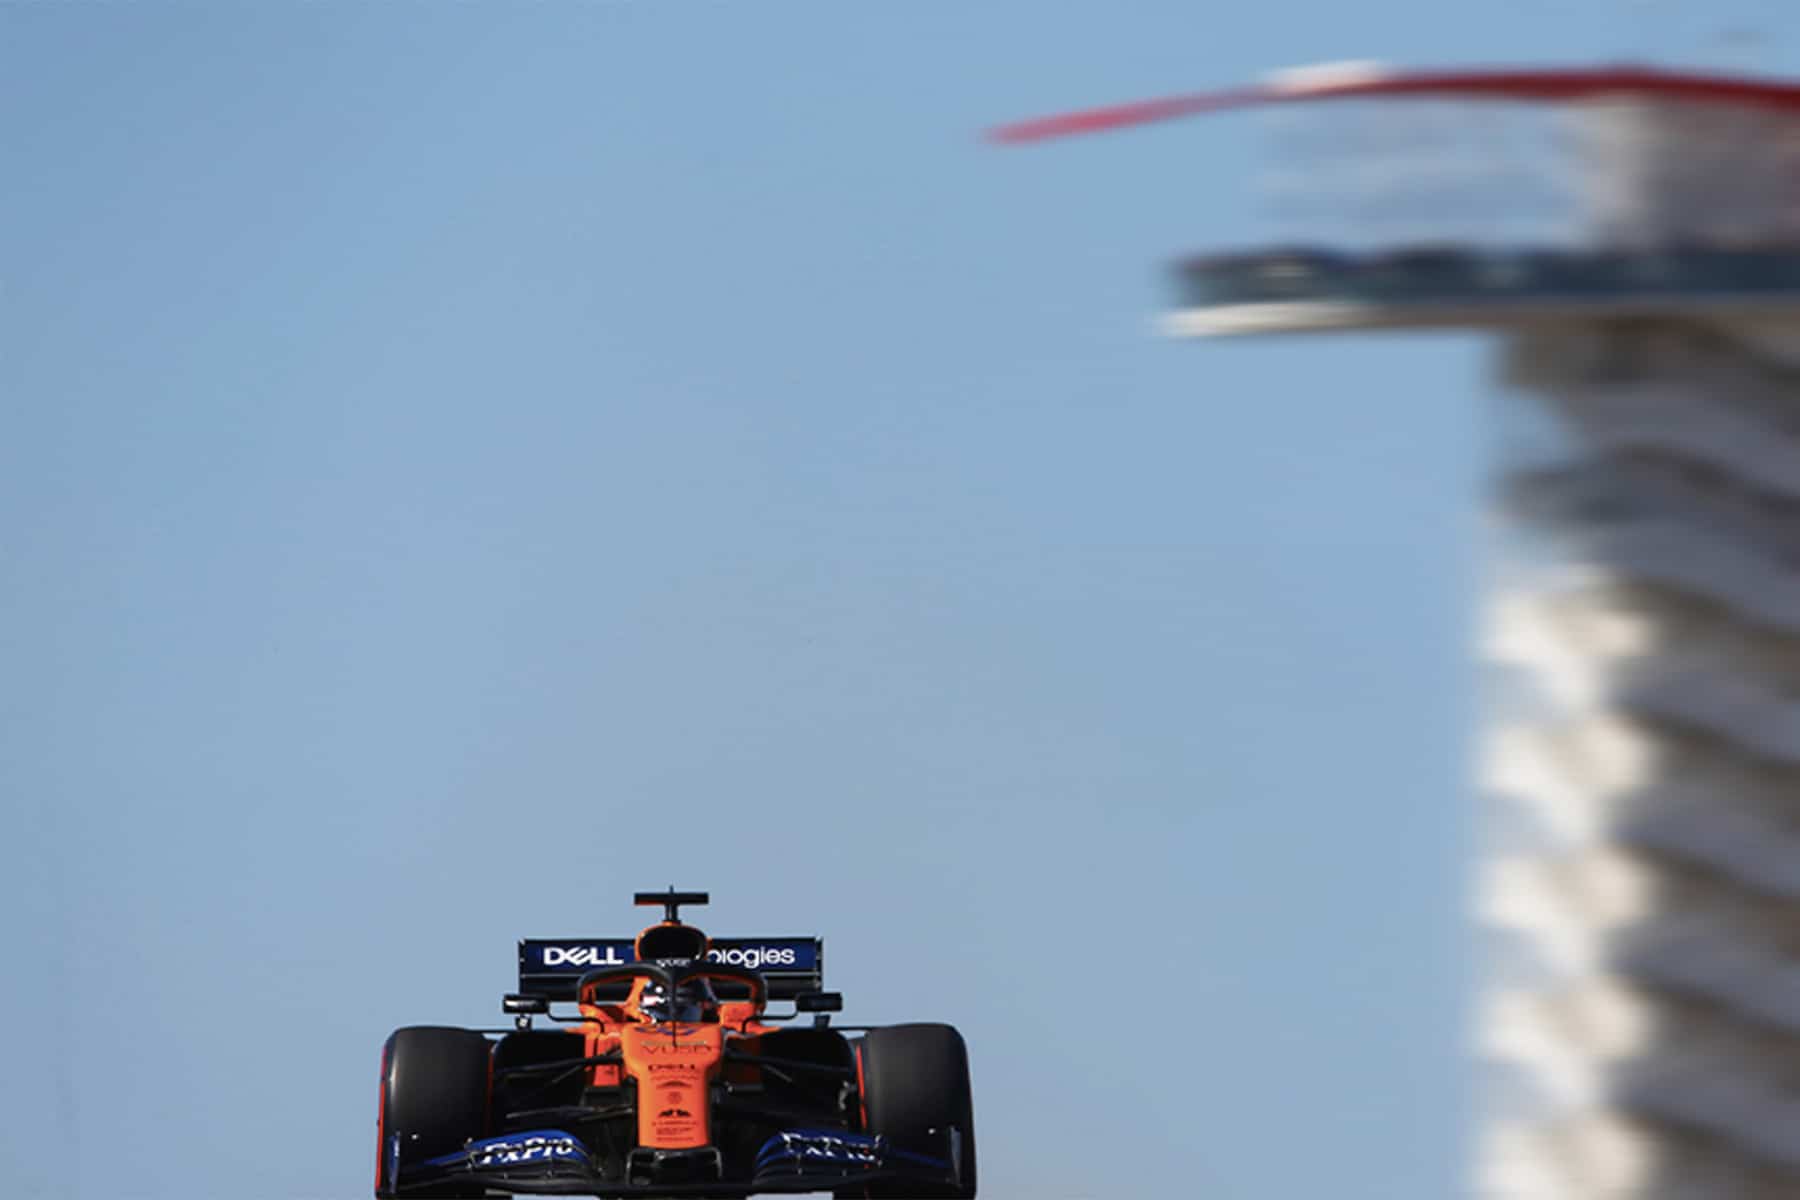 One of the McLaren cars roars past the Circuit of the Americas tower.